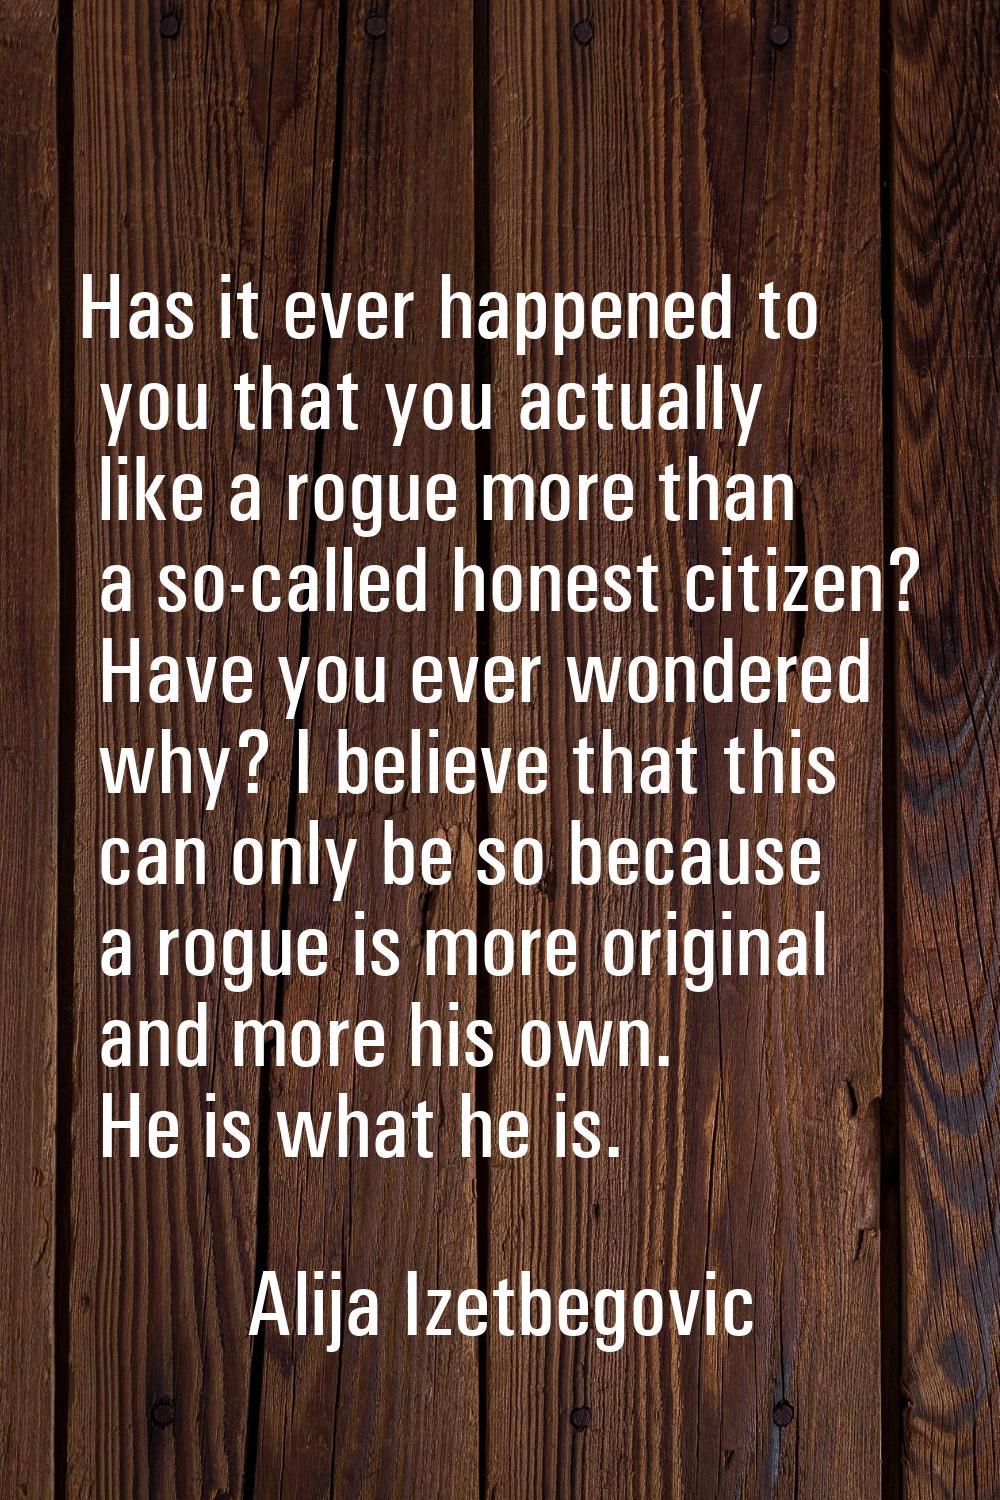 Has it ever happened to you that you actually like a rogue more than a so-called honest citizen? Ha